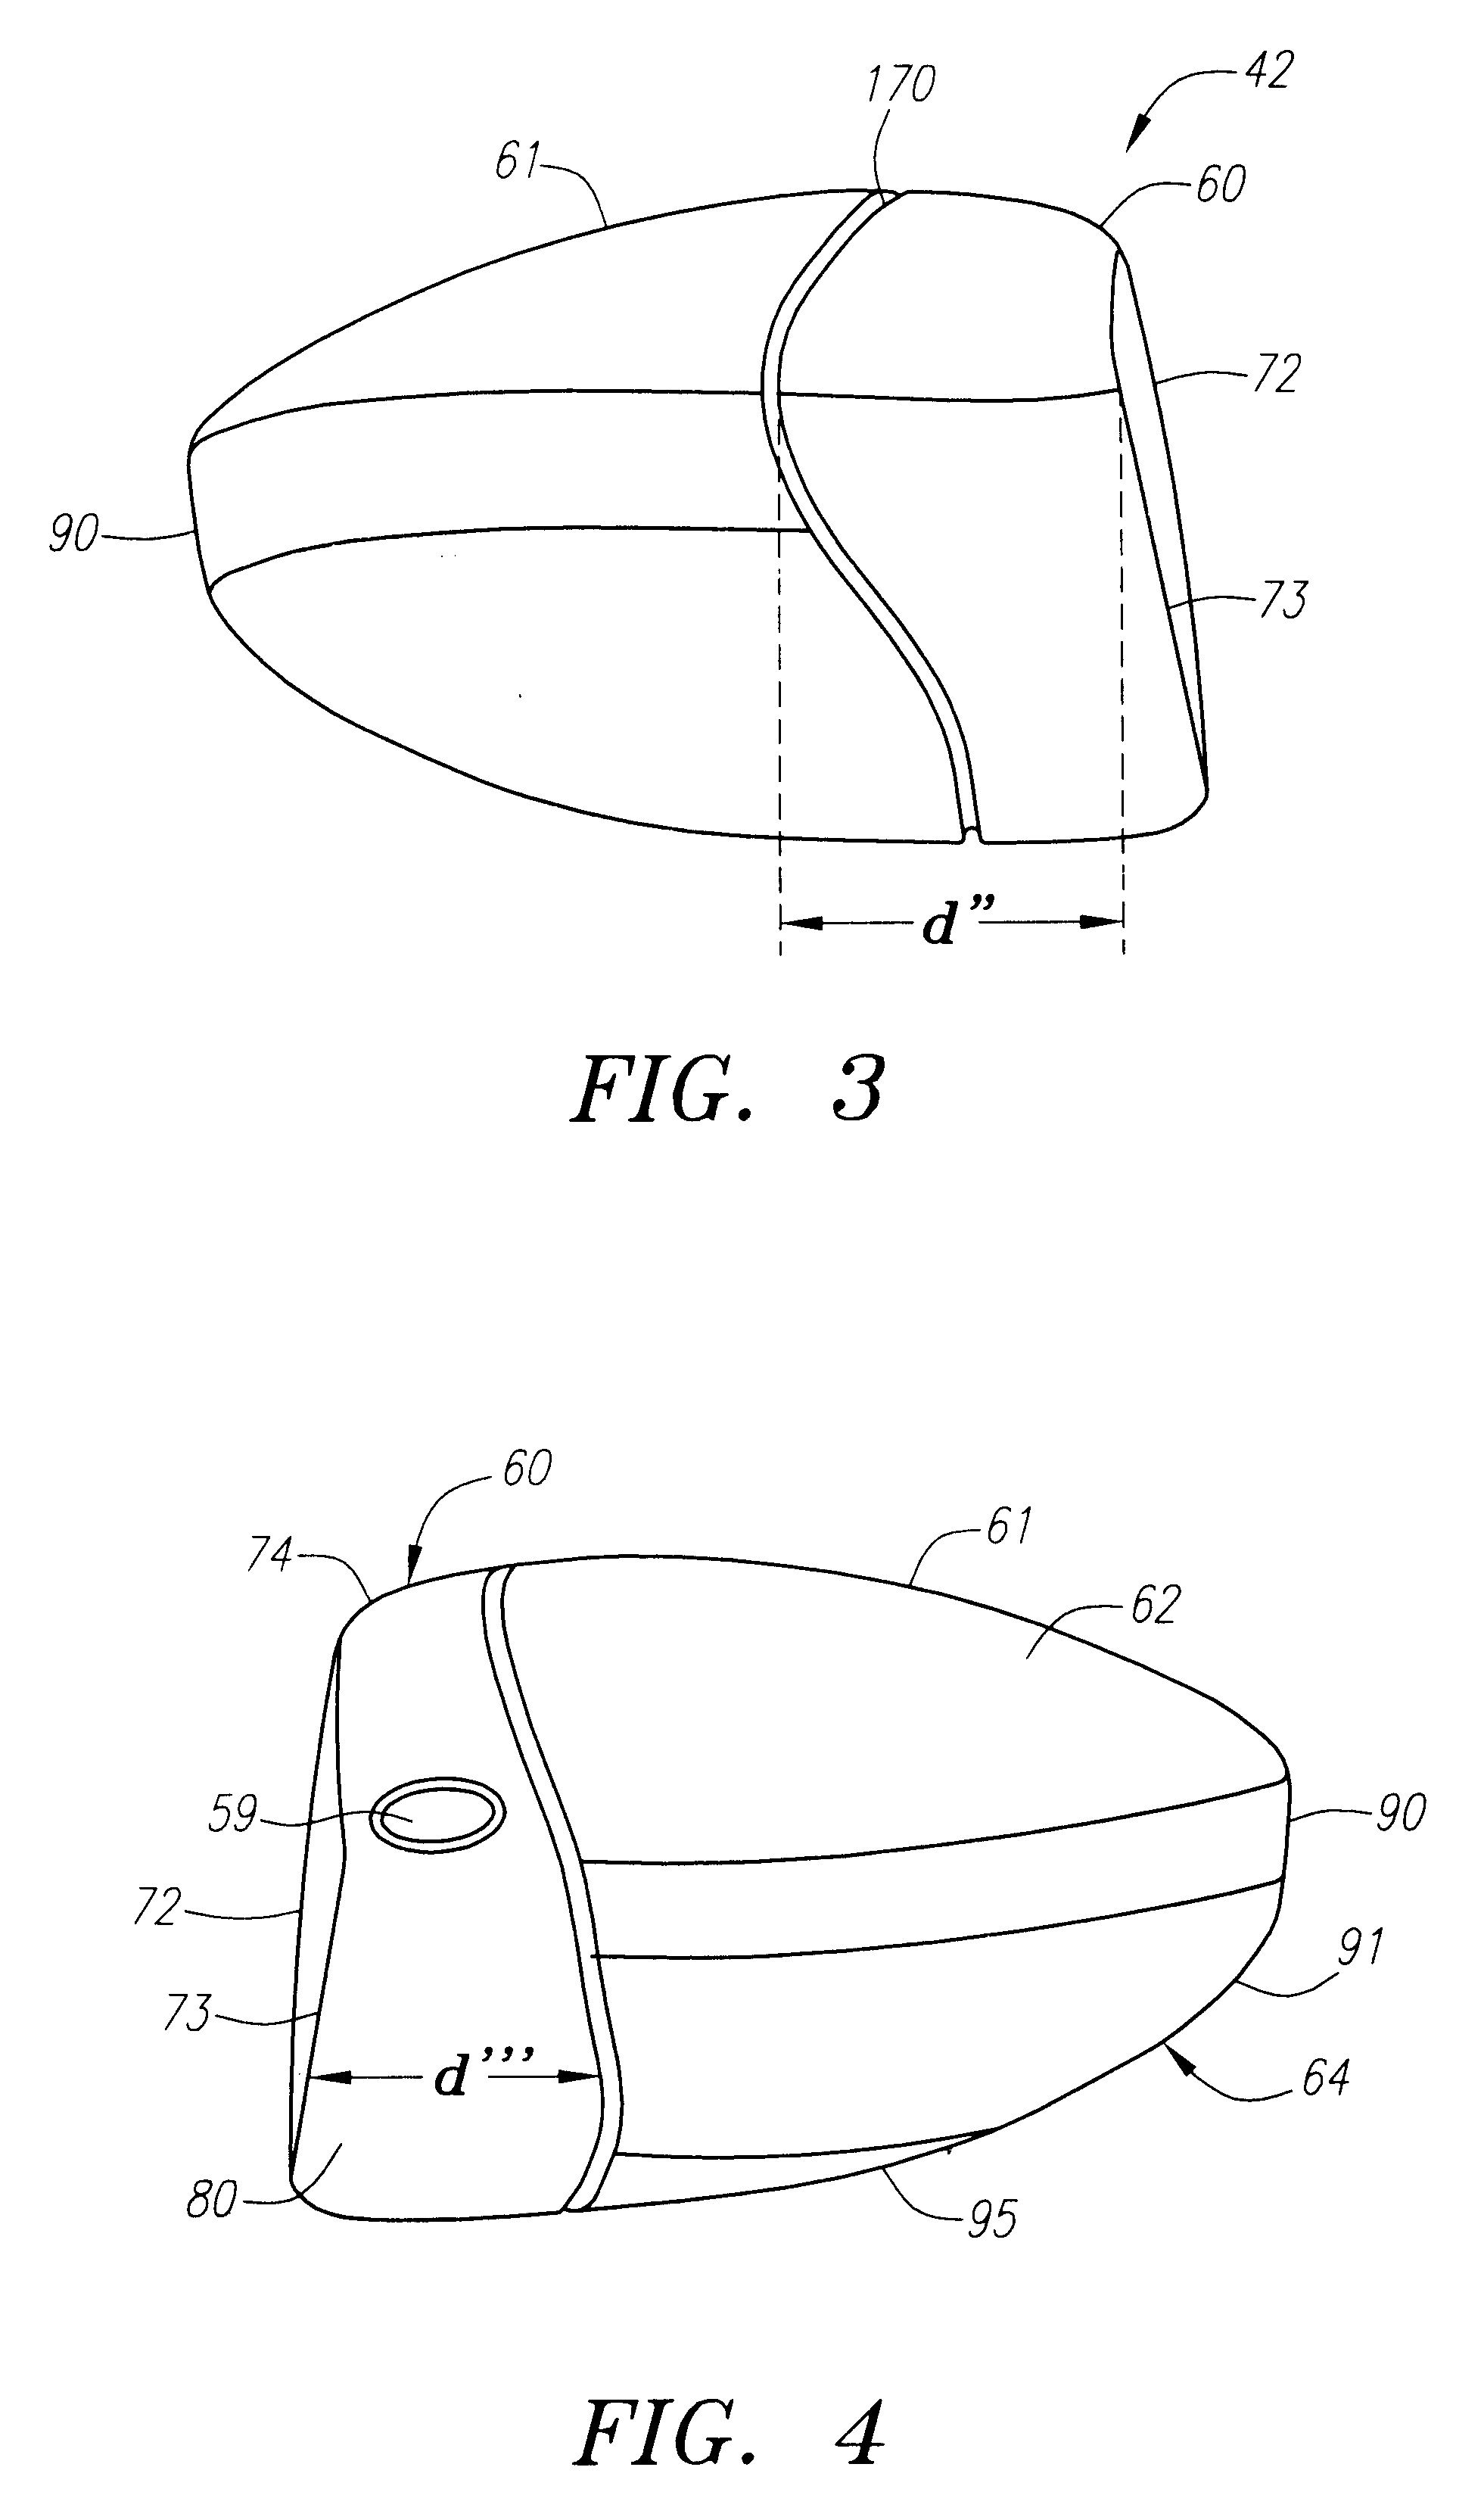 Bonded joint design for a golf club head